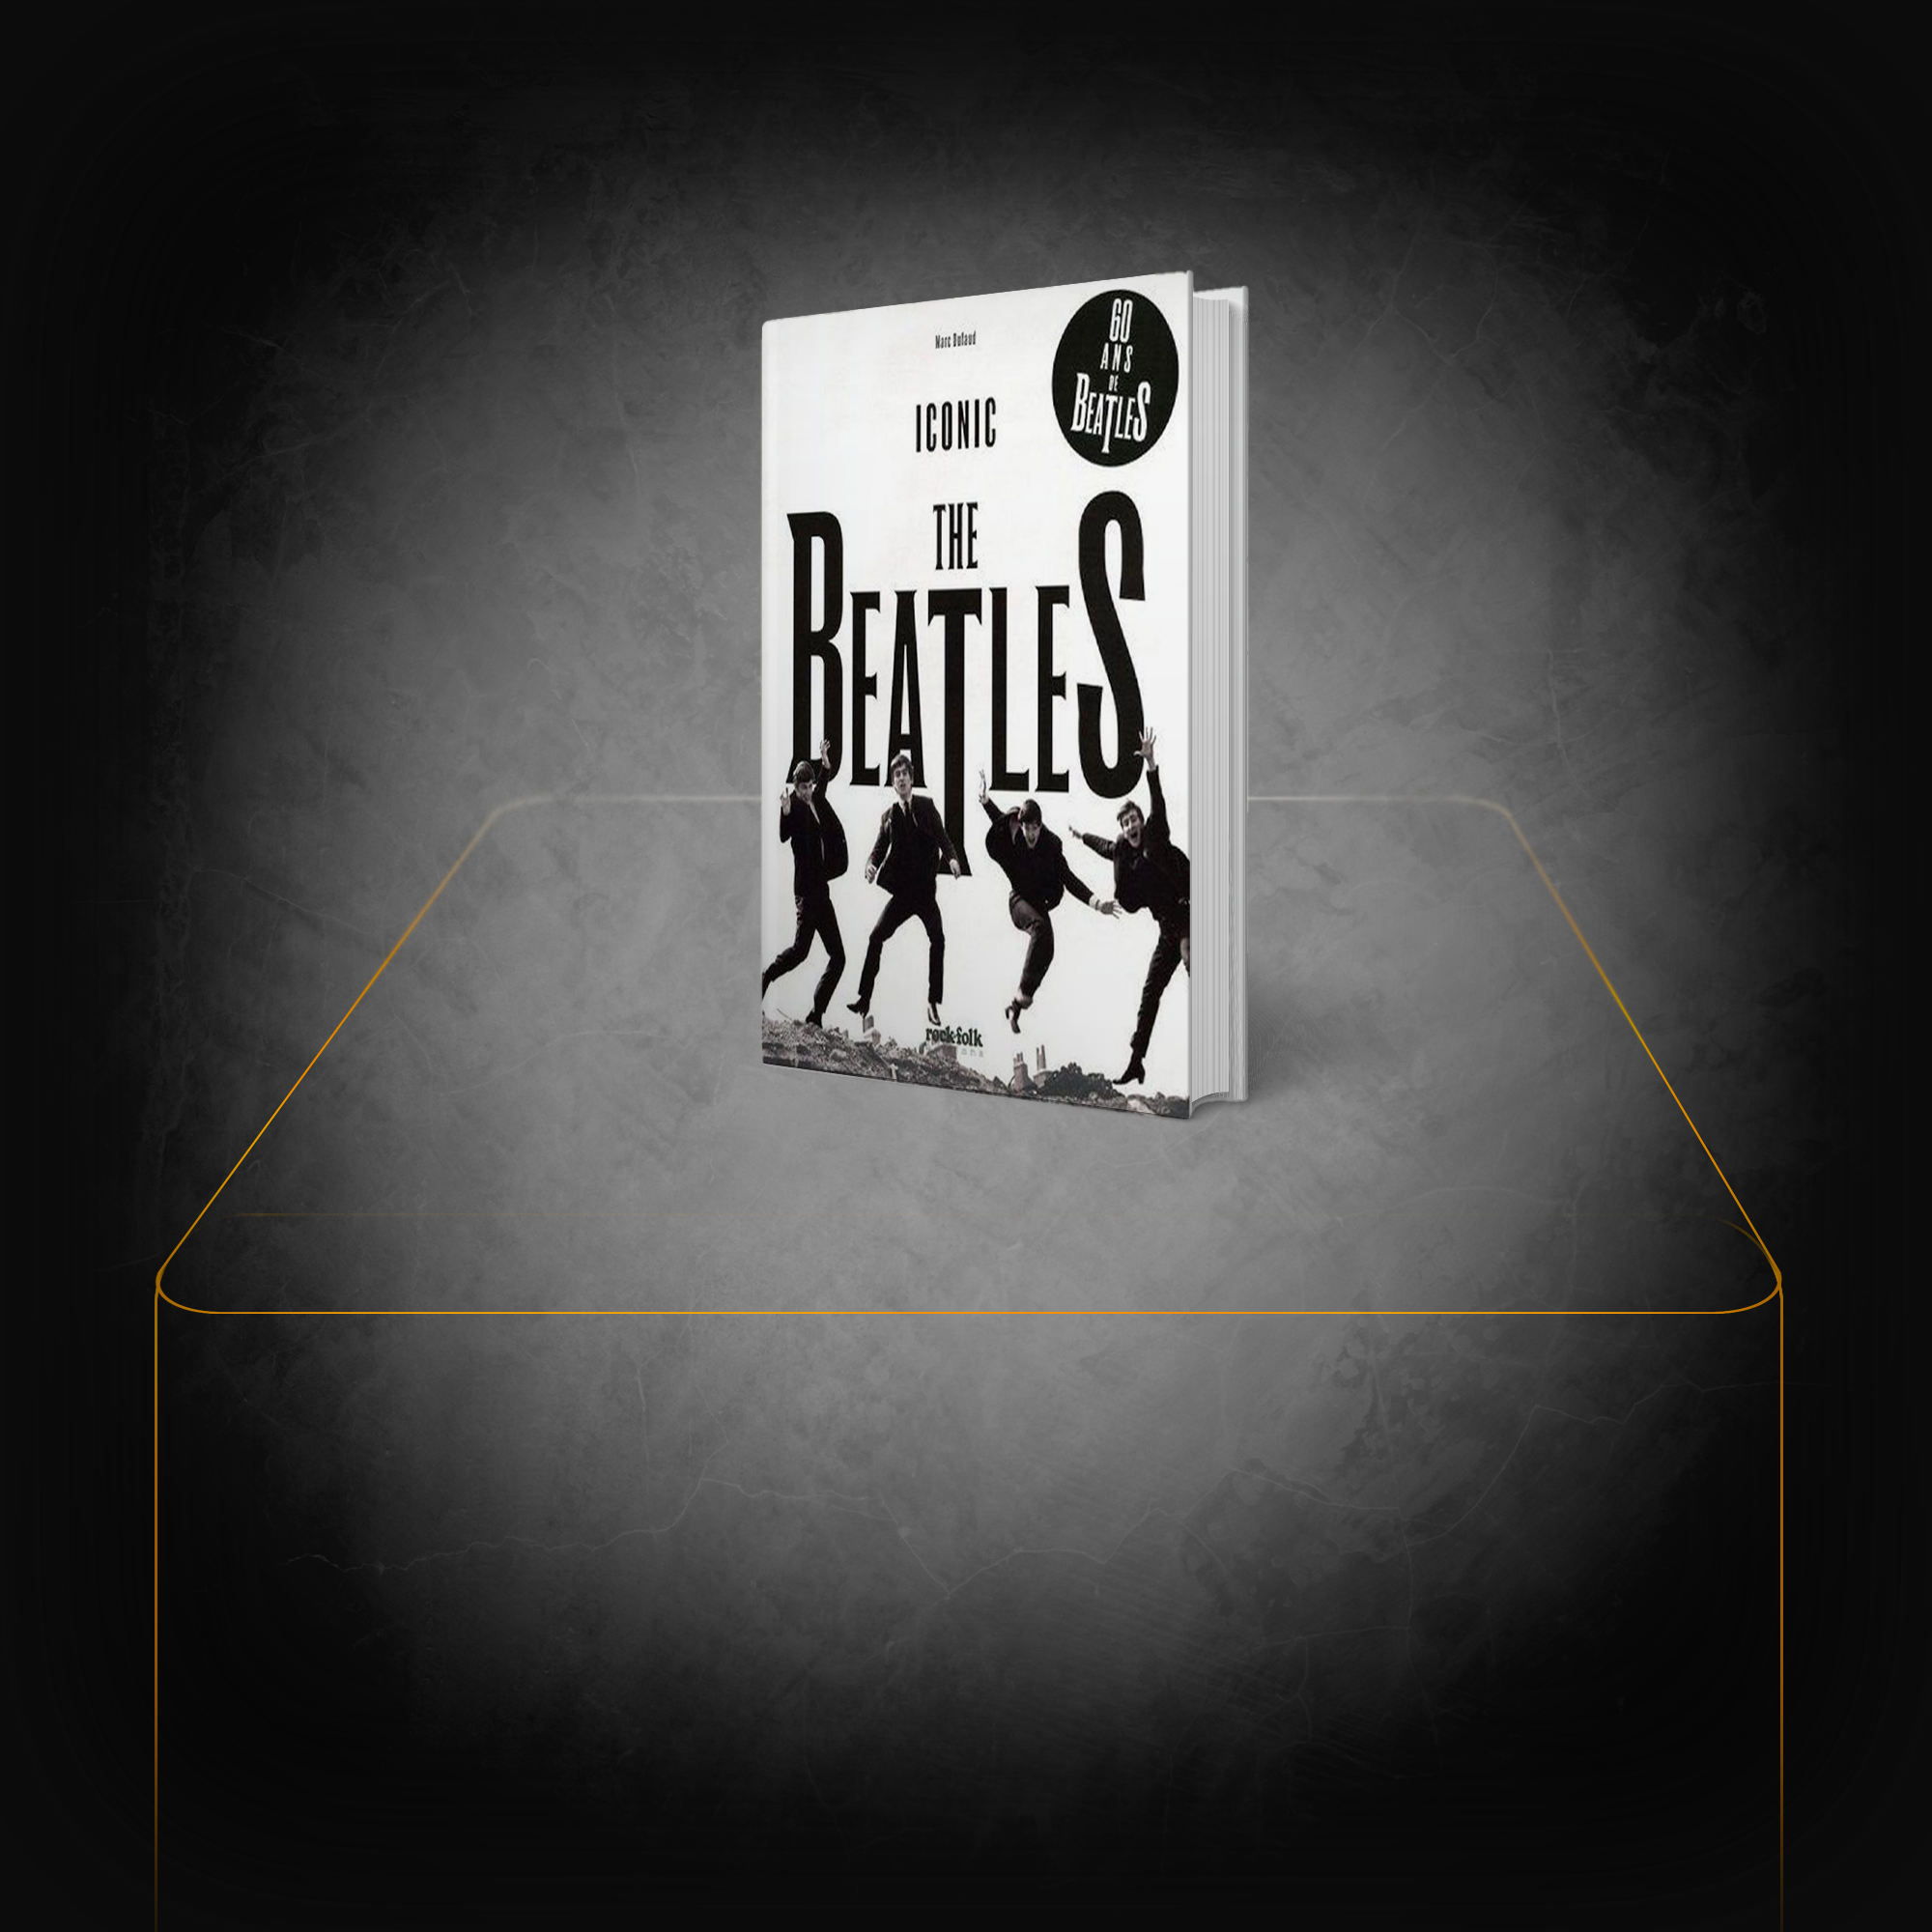 Book The Beatles: iconic: 60 years of Beatles